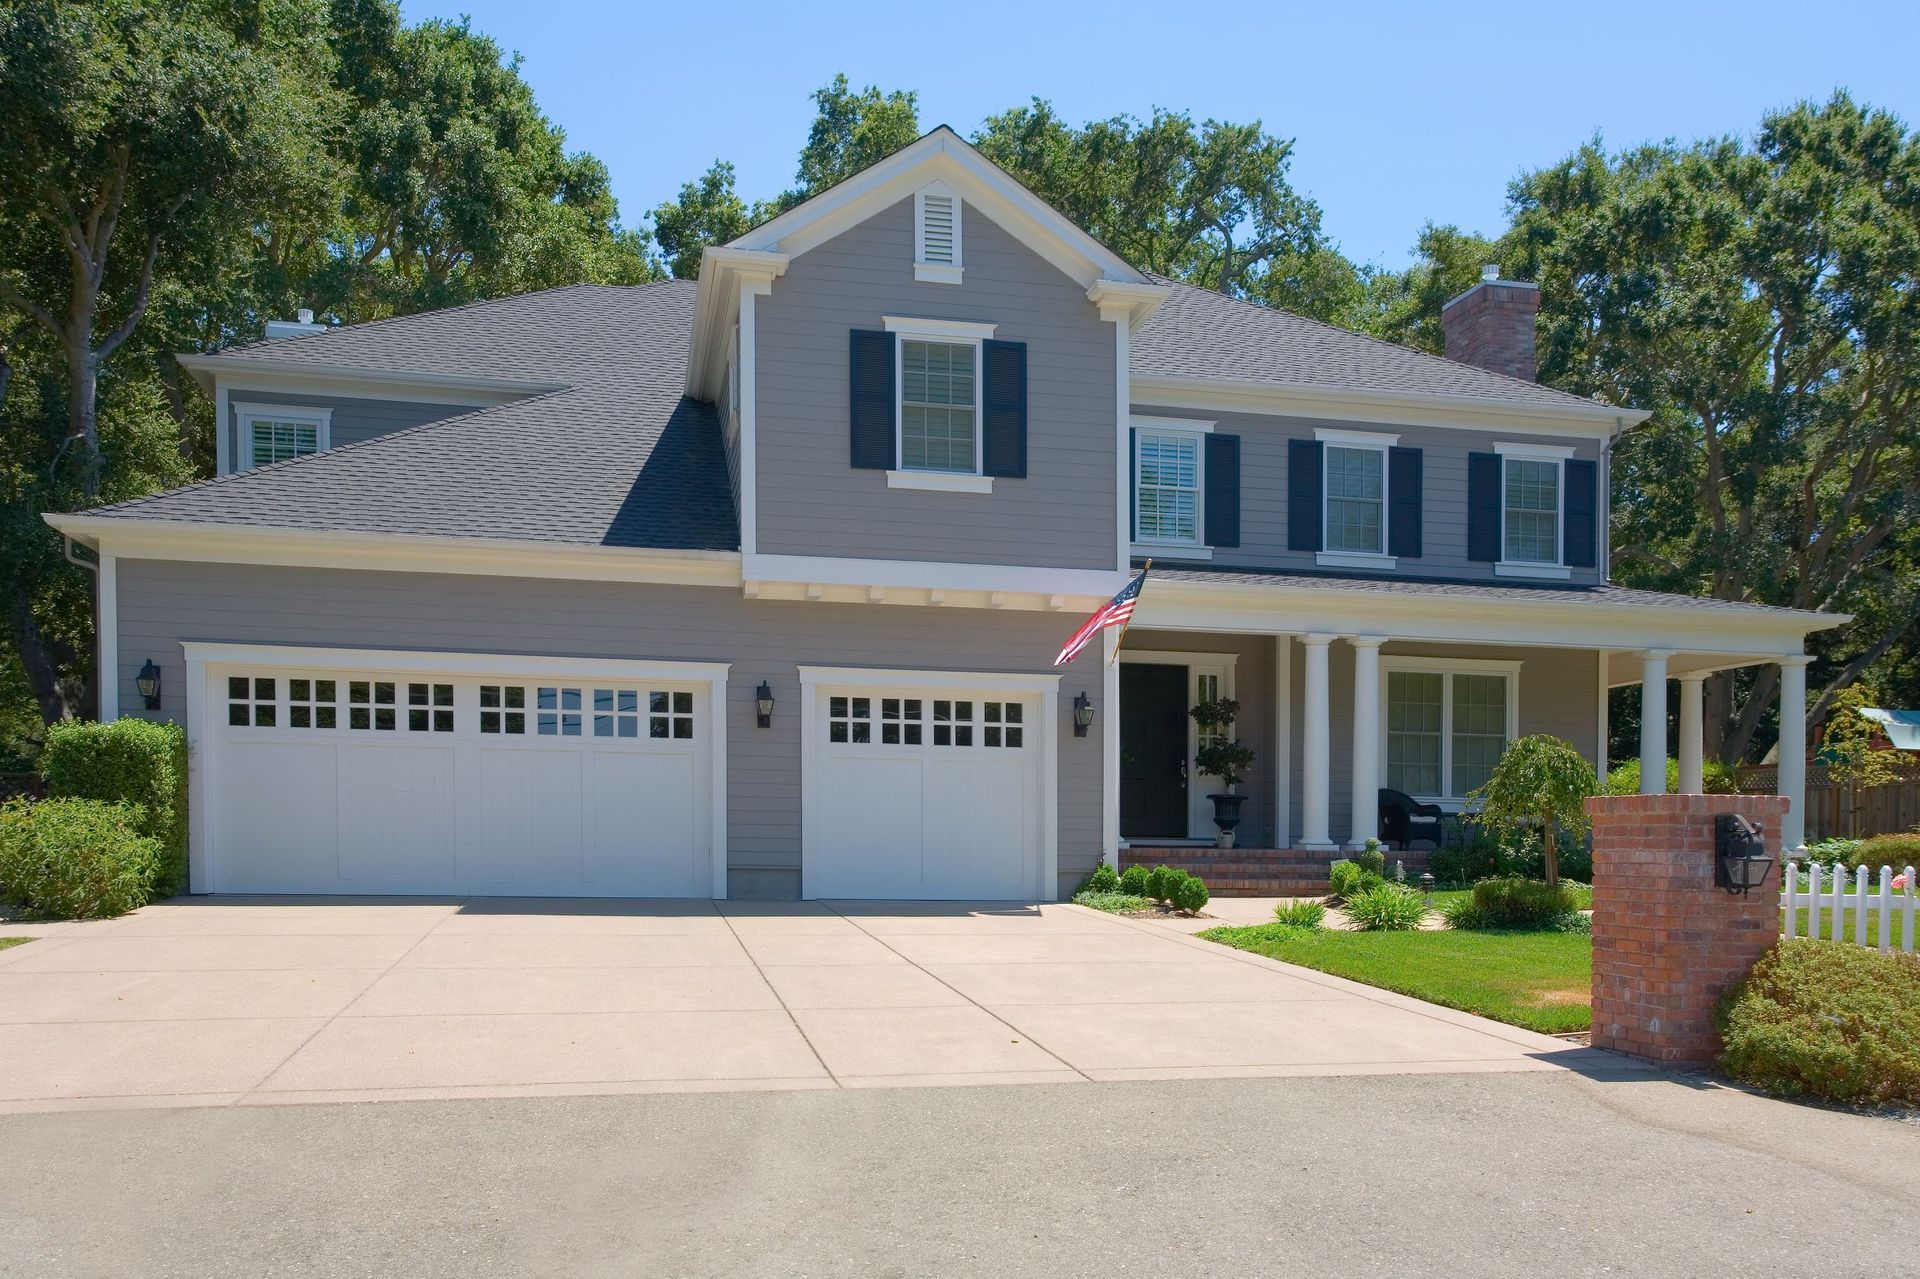 An image of Concrete Driveway Services in Smyrna GA